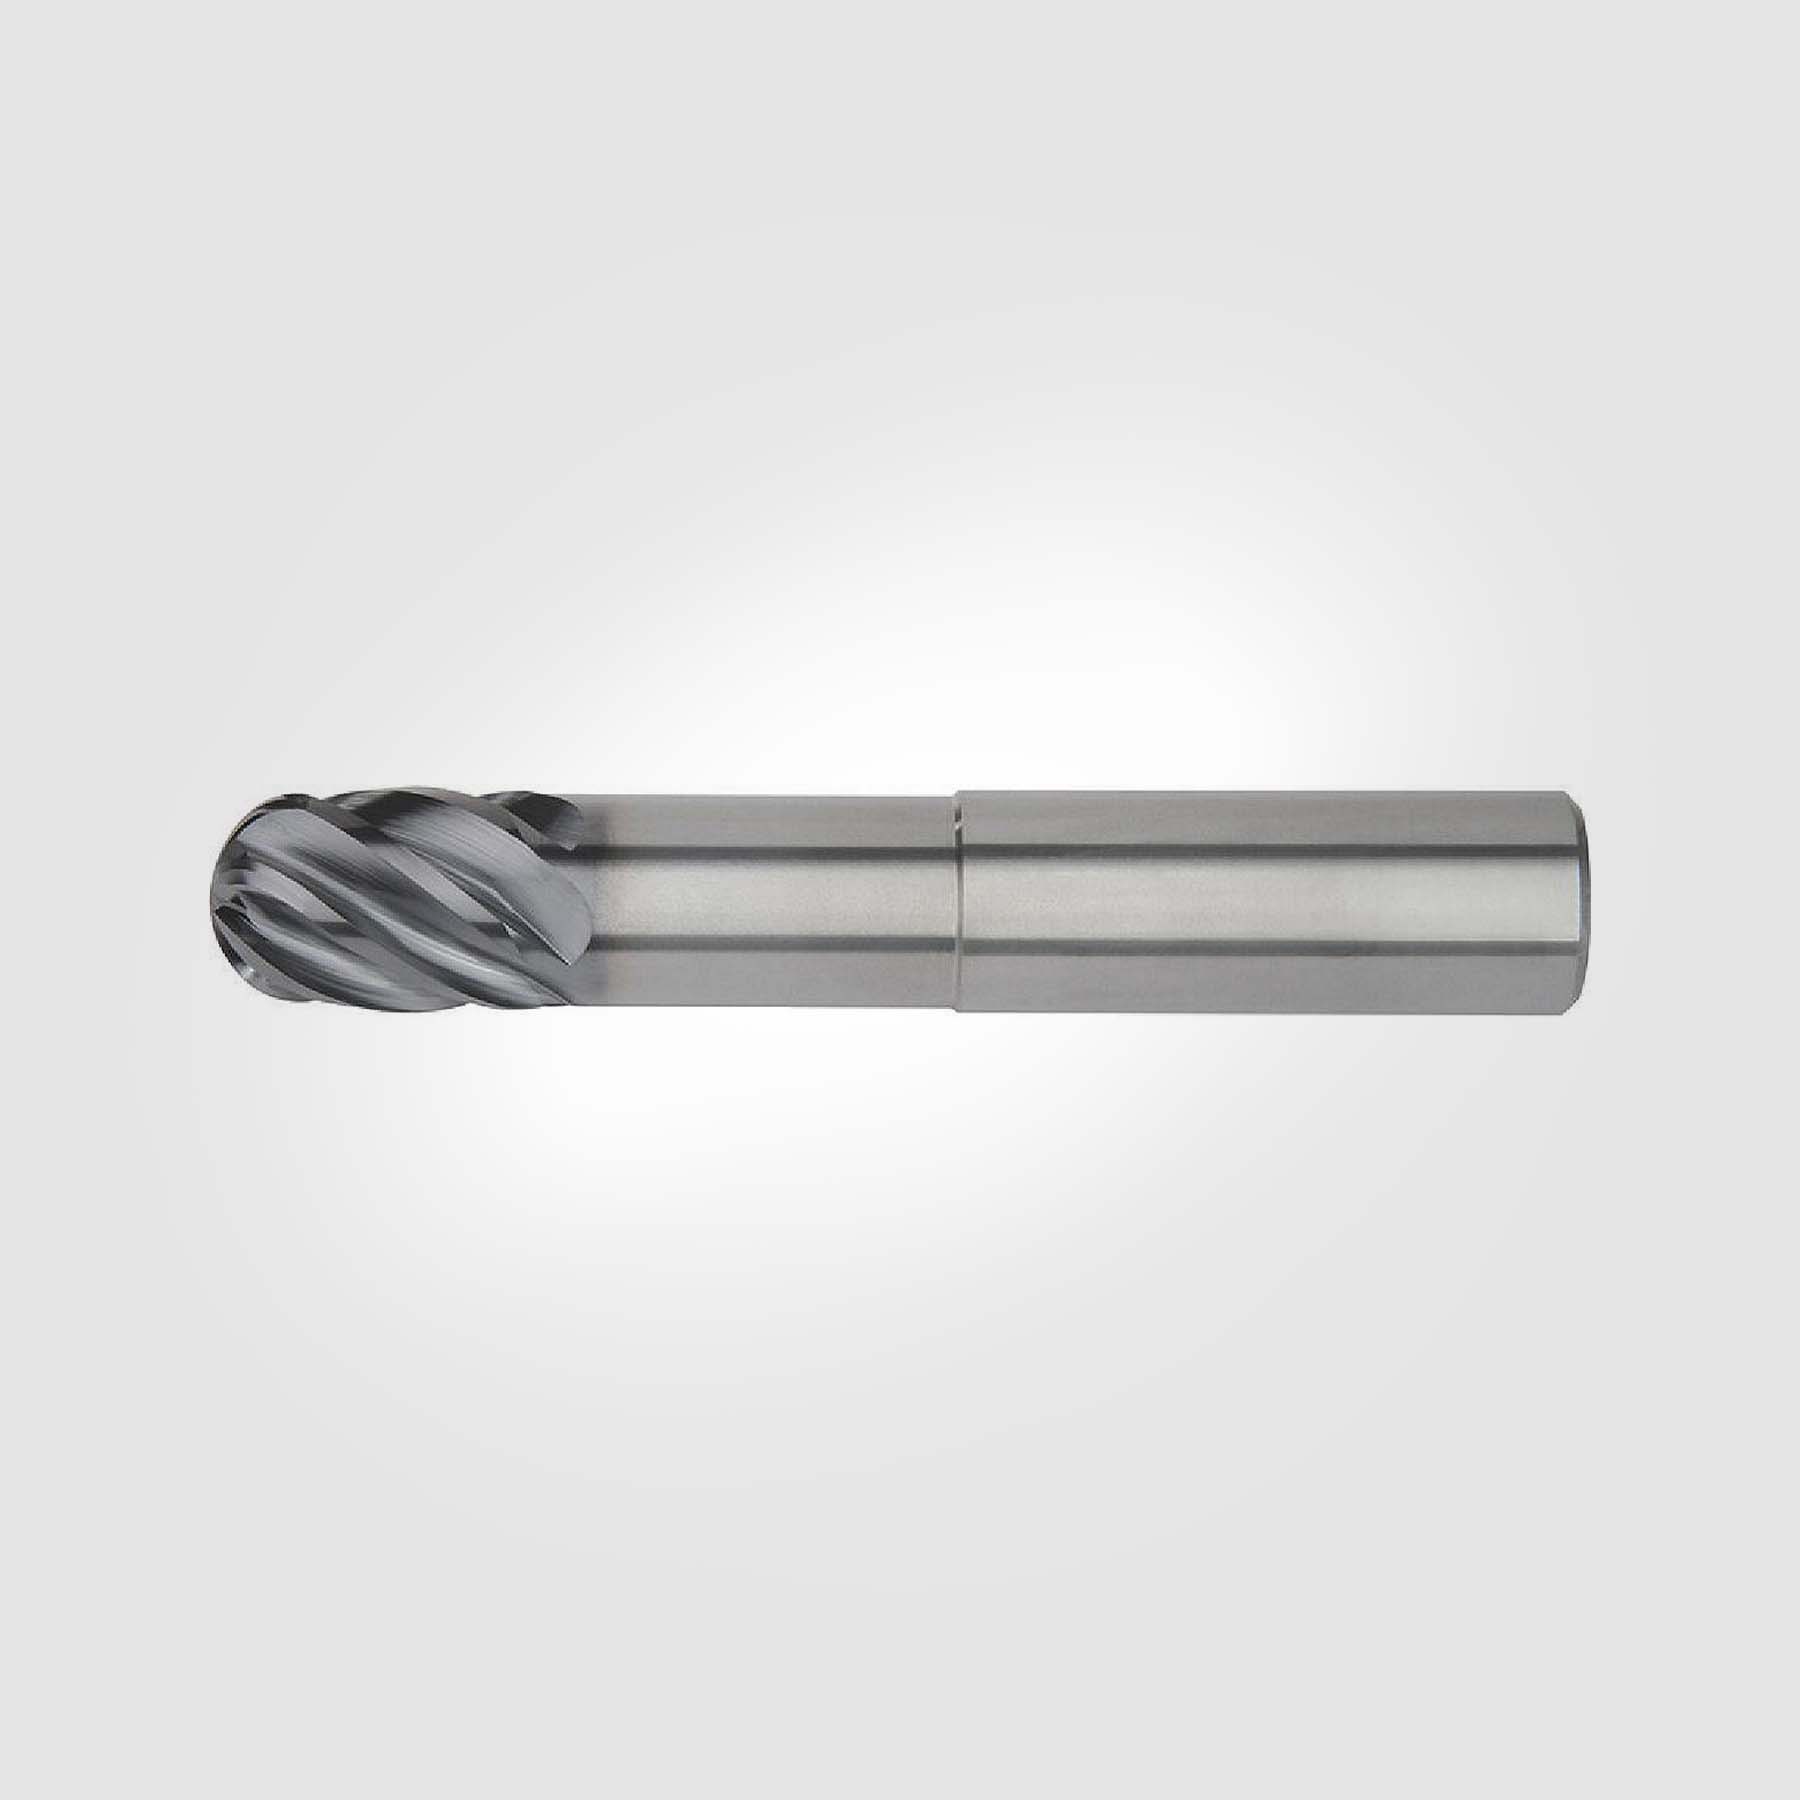 HARVI III (BALL NOSE) | 1" x 1" x 1 1/4" x 6" | SOLID CARBIDE NECKED ENDMILL 6 FLUTE | 5607305